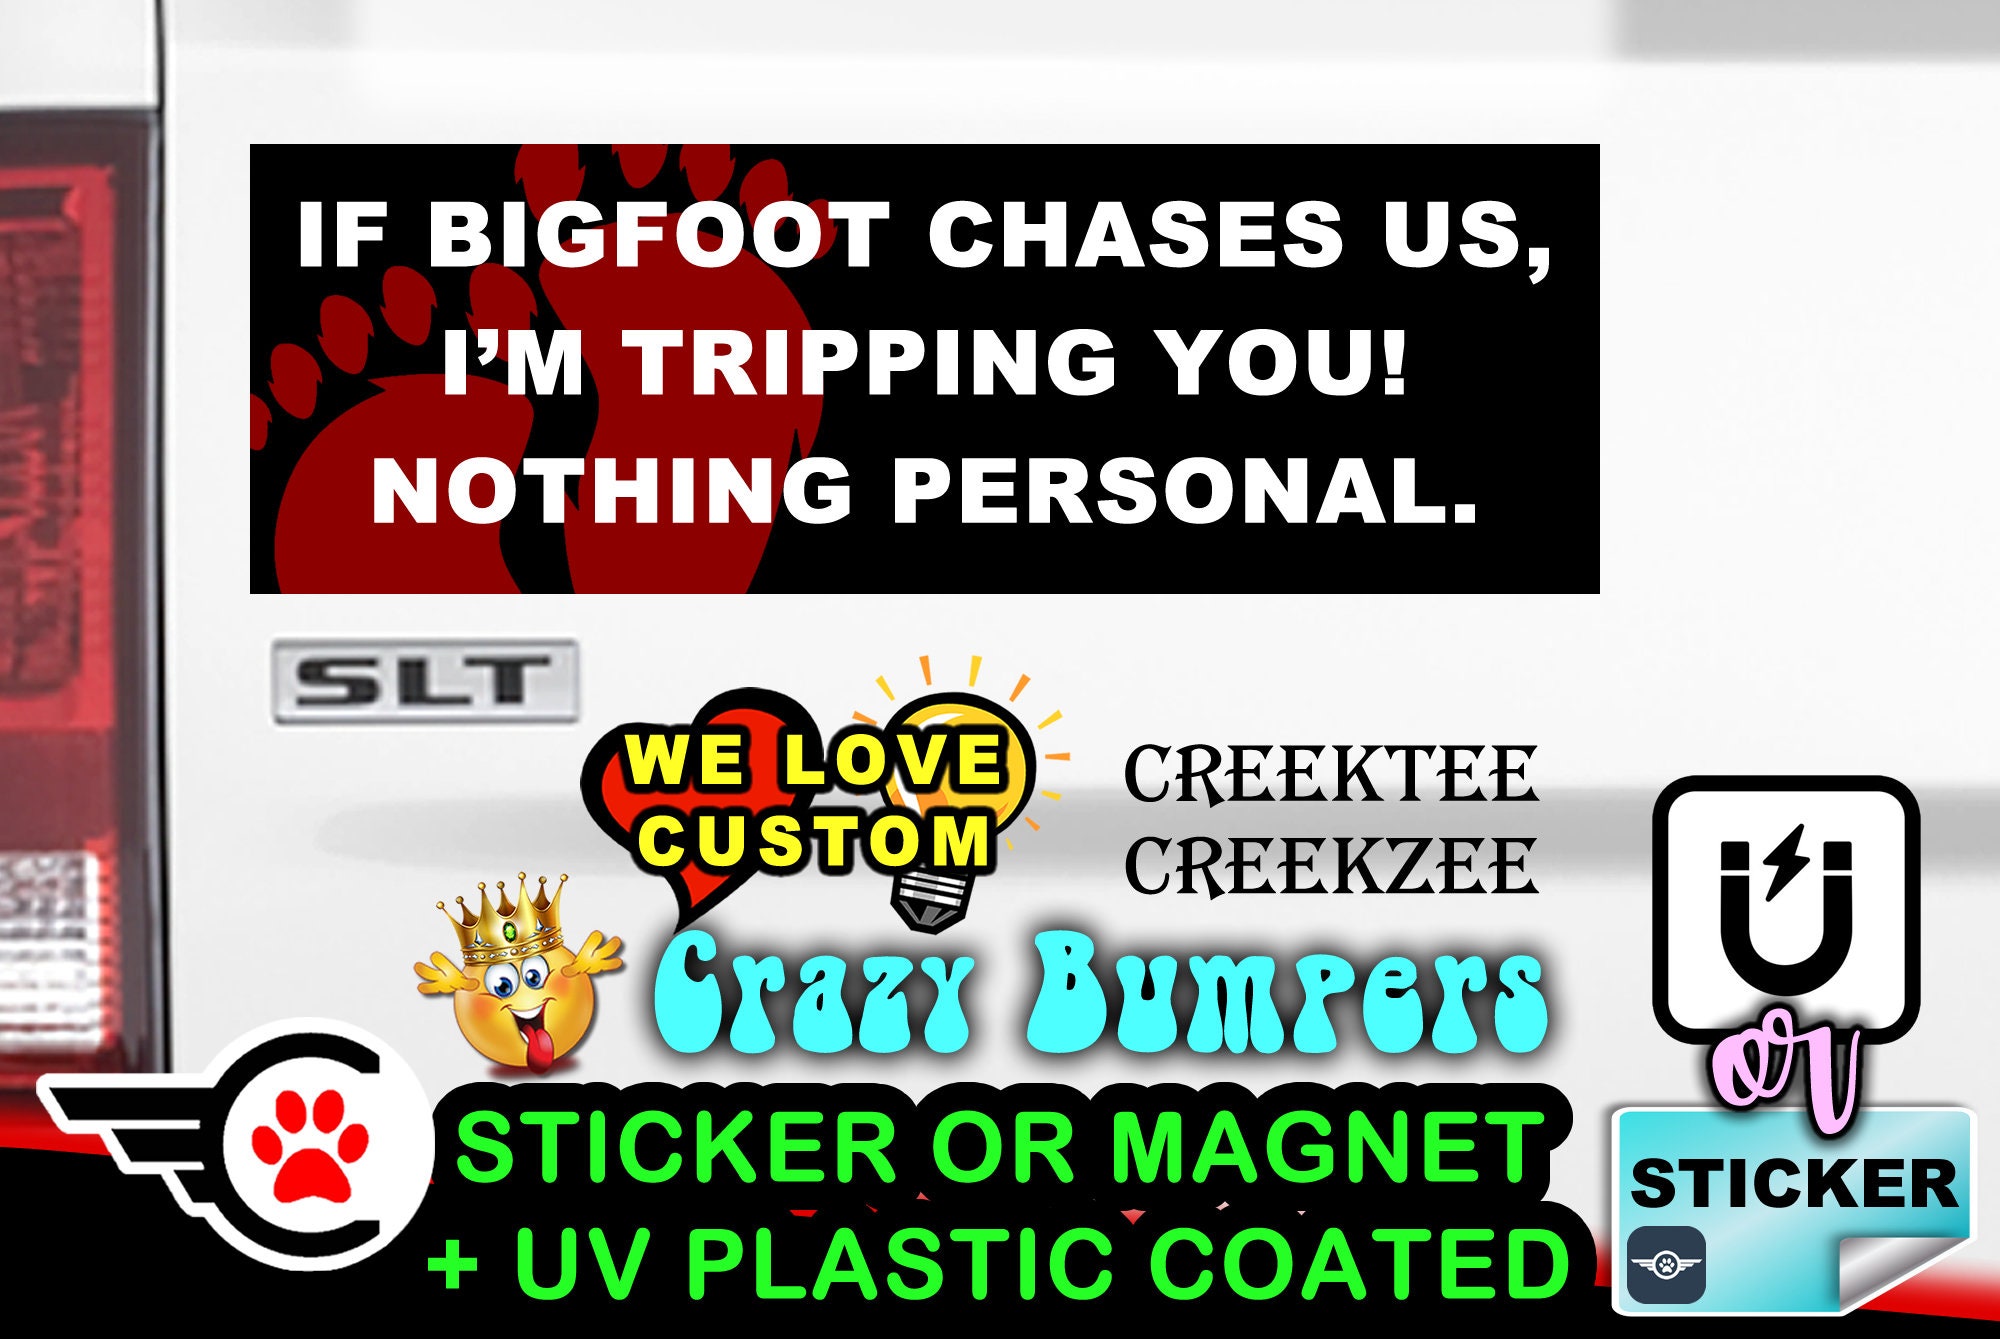 If Bigfoot Chases Us, I'm Tripping You! Nothing Personal.  - Funny Bumper Sticker or Magnet 9